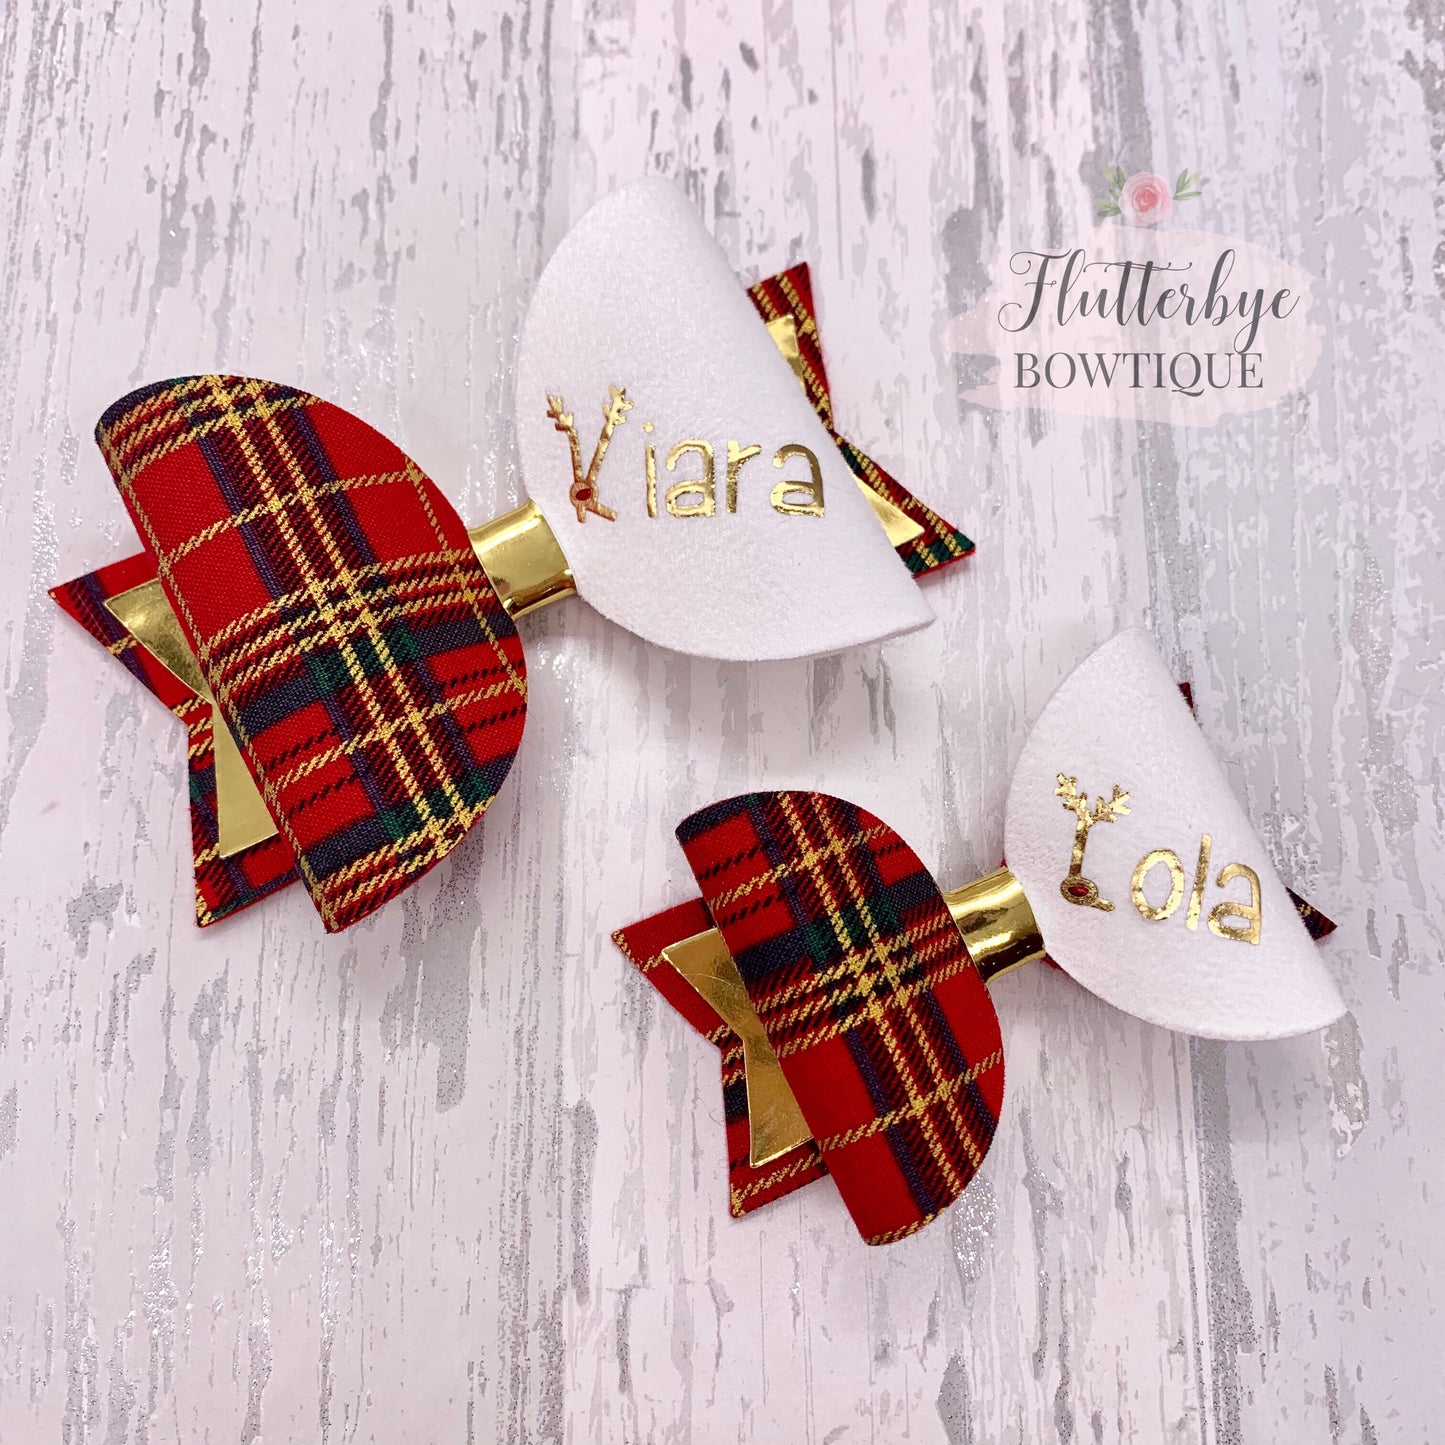 Personalised Tartan Christmas Bow, reindeer Name Bow - Flutterbye Bowtique